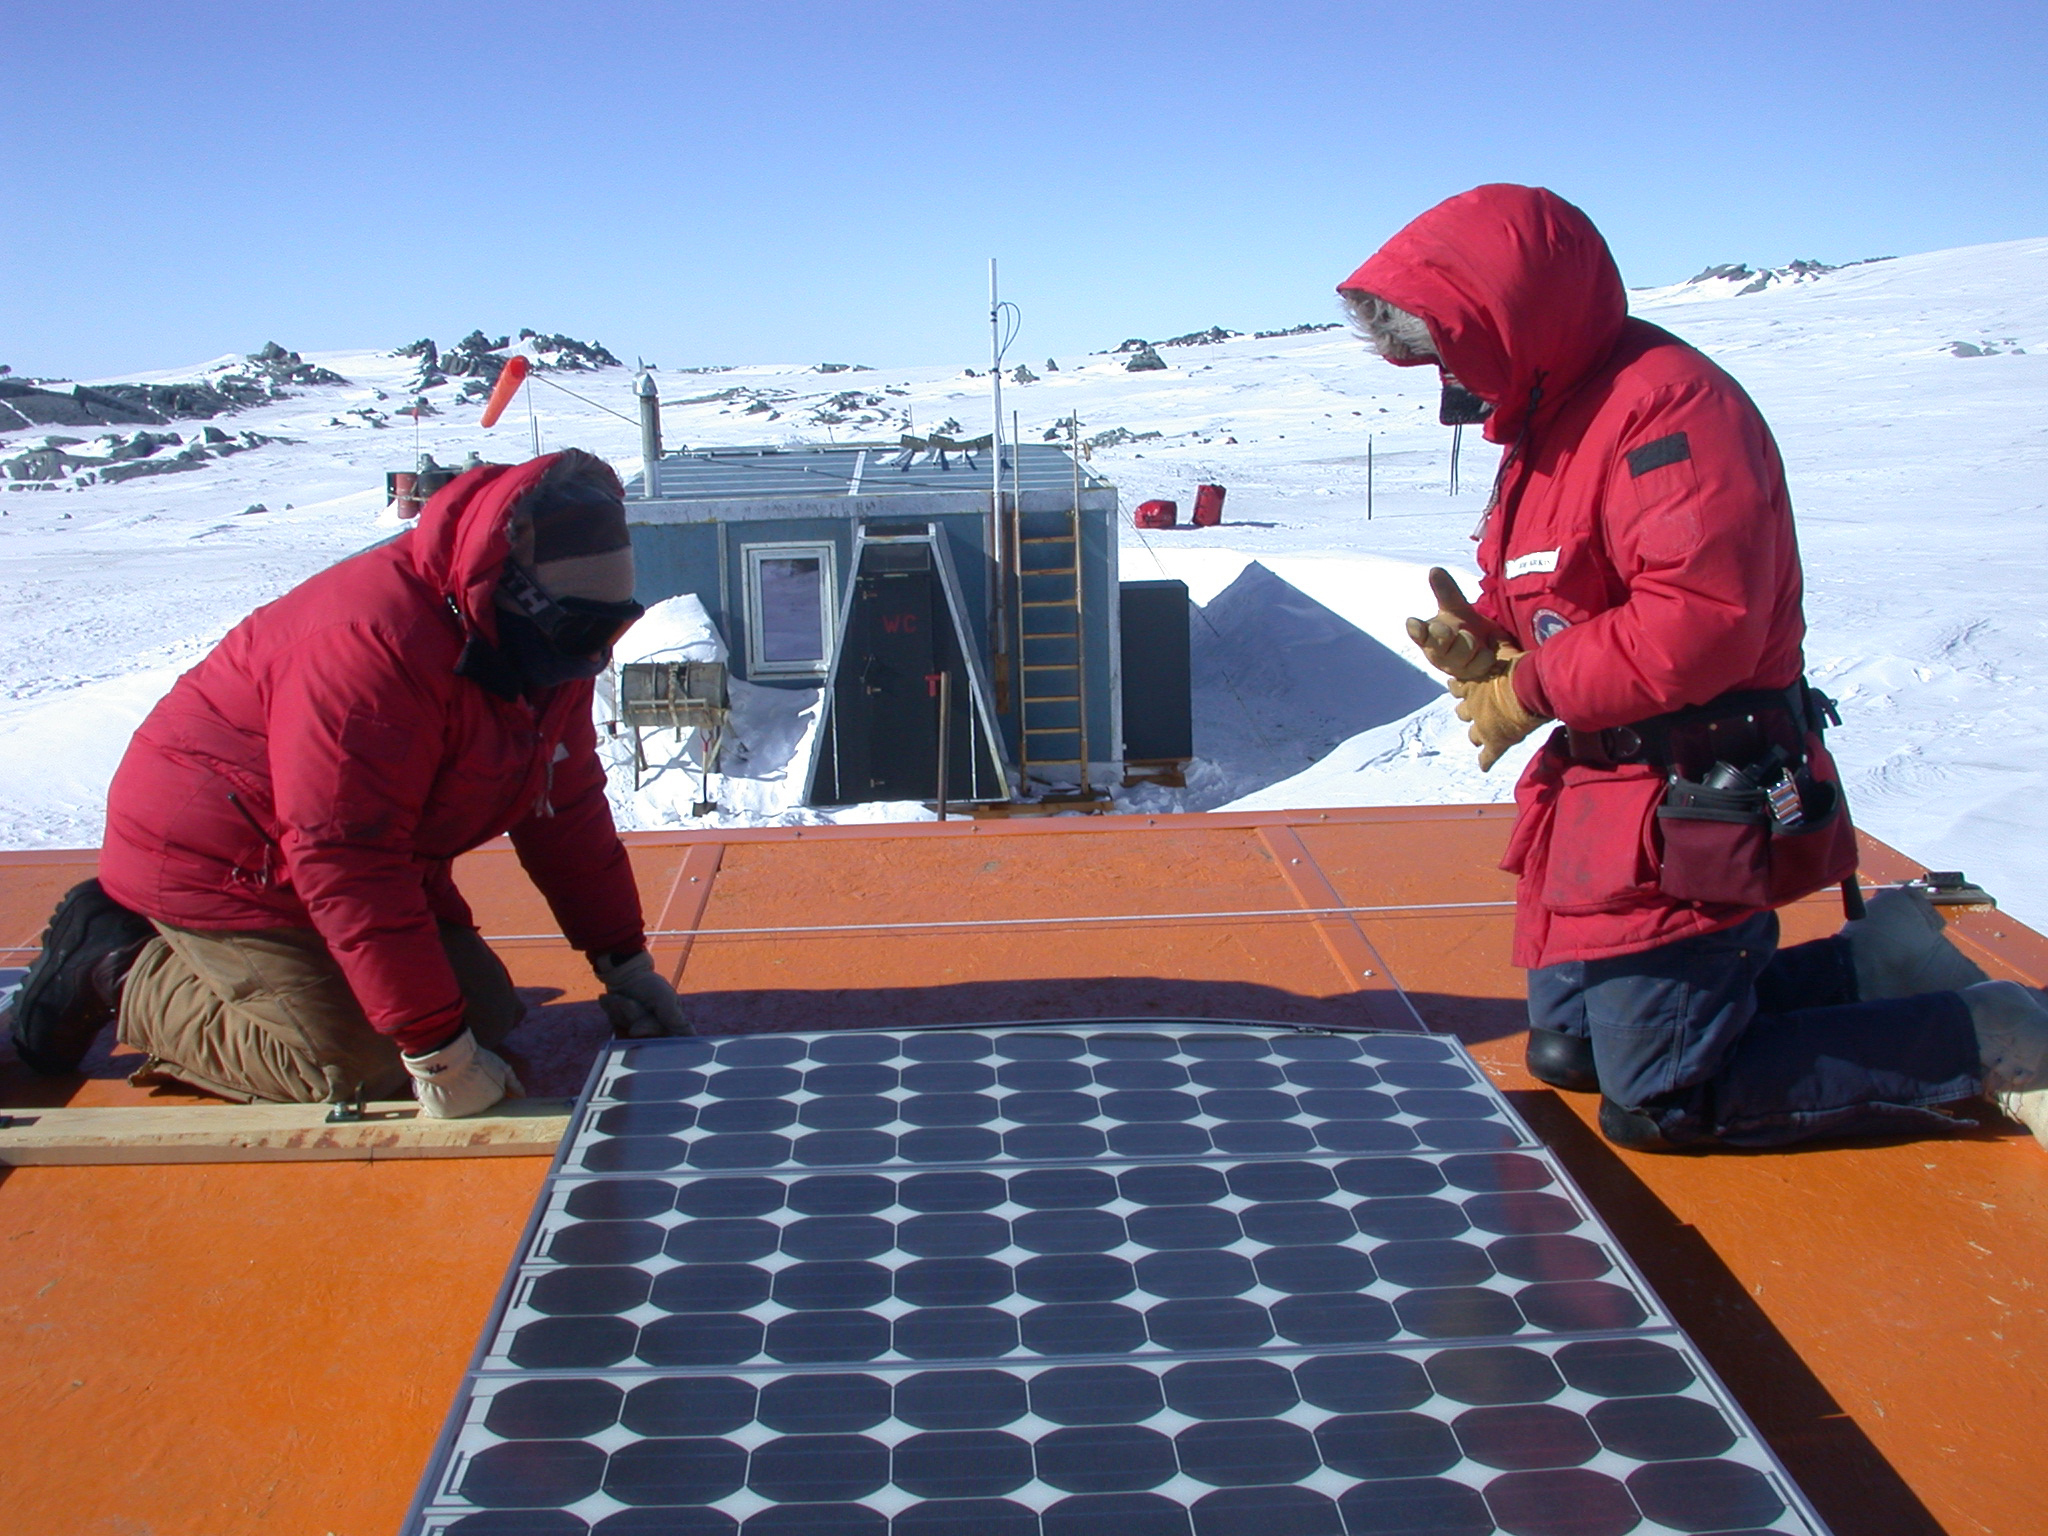 Two construction workers in red parkas kneel next to a solar panel while working outside.